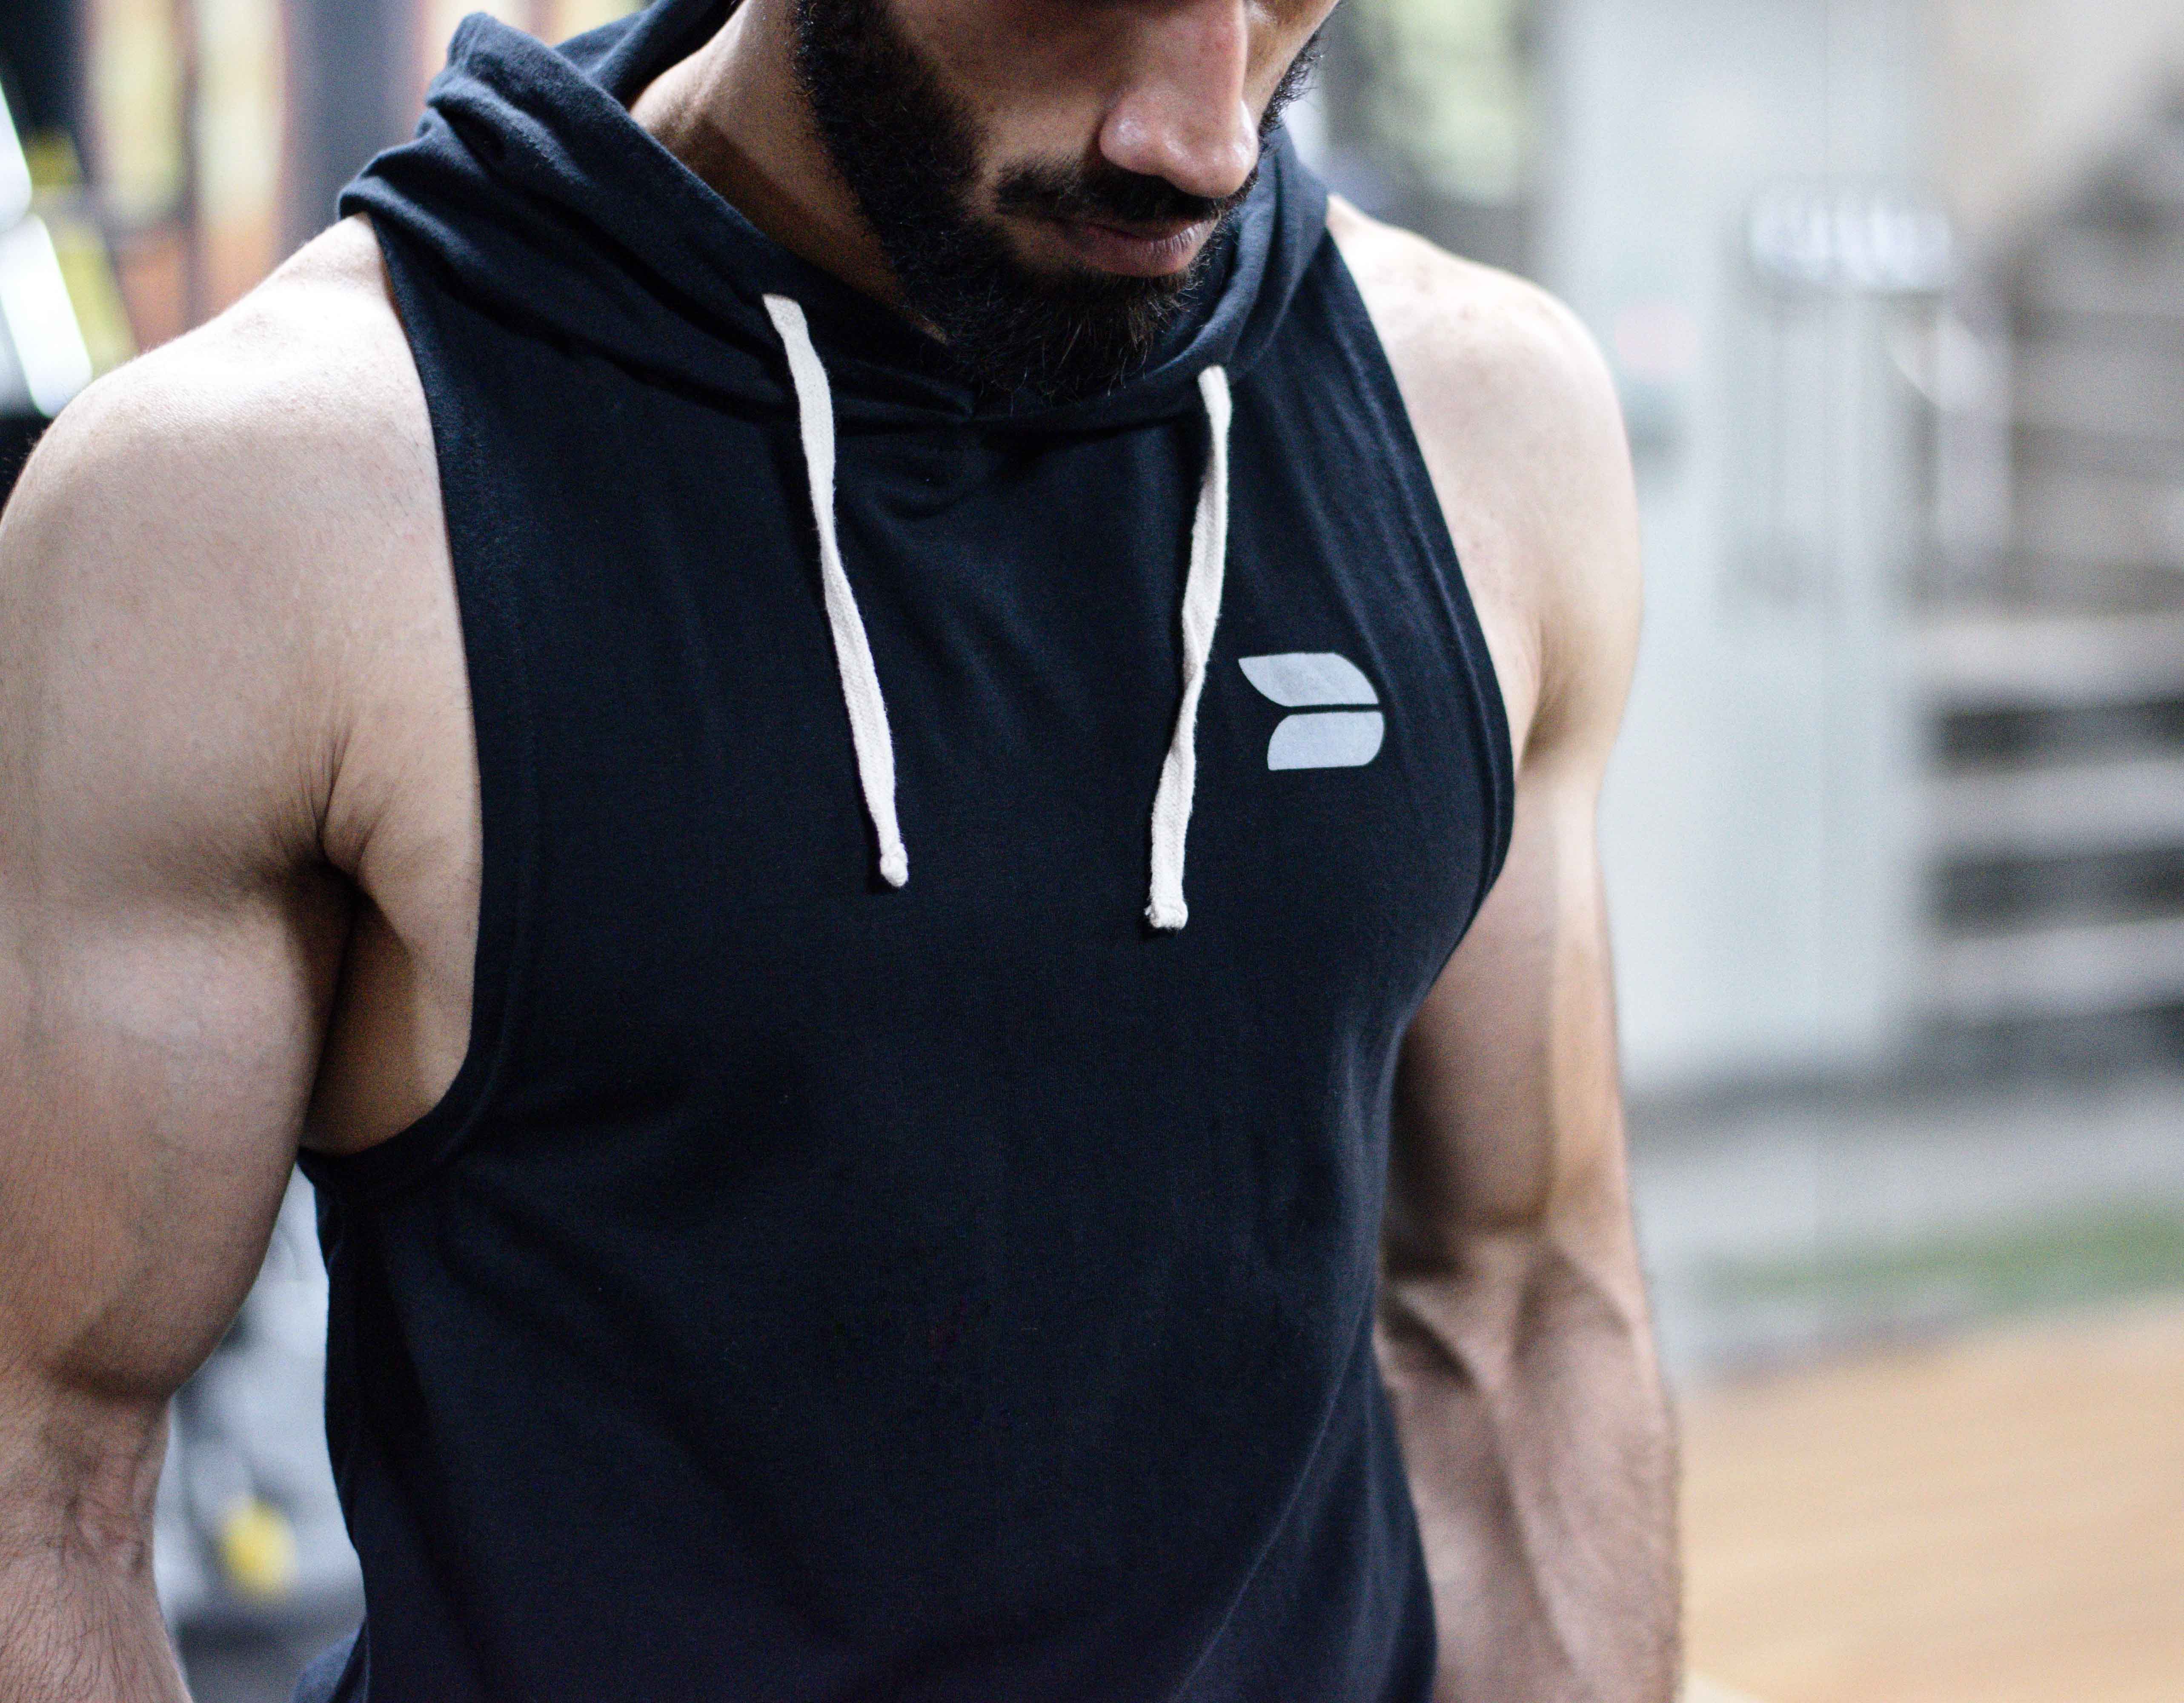 Devoted Blog - Fundamentals of transformation - Loose fat, Build Muscle - Devoted Black Sleeveless Hoodie - Gym & Sports Wear